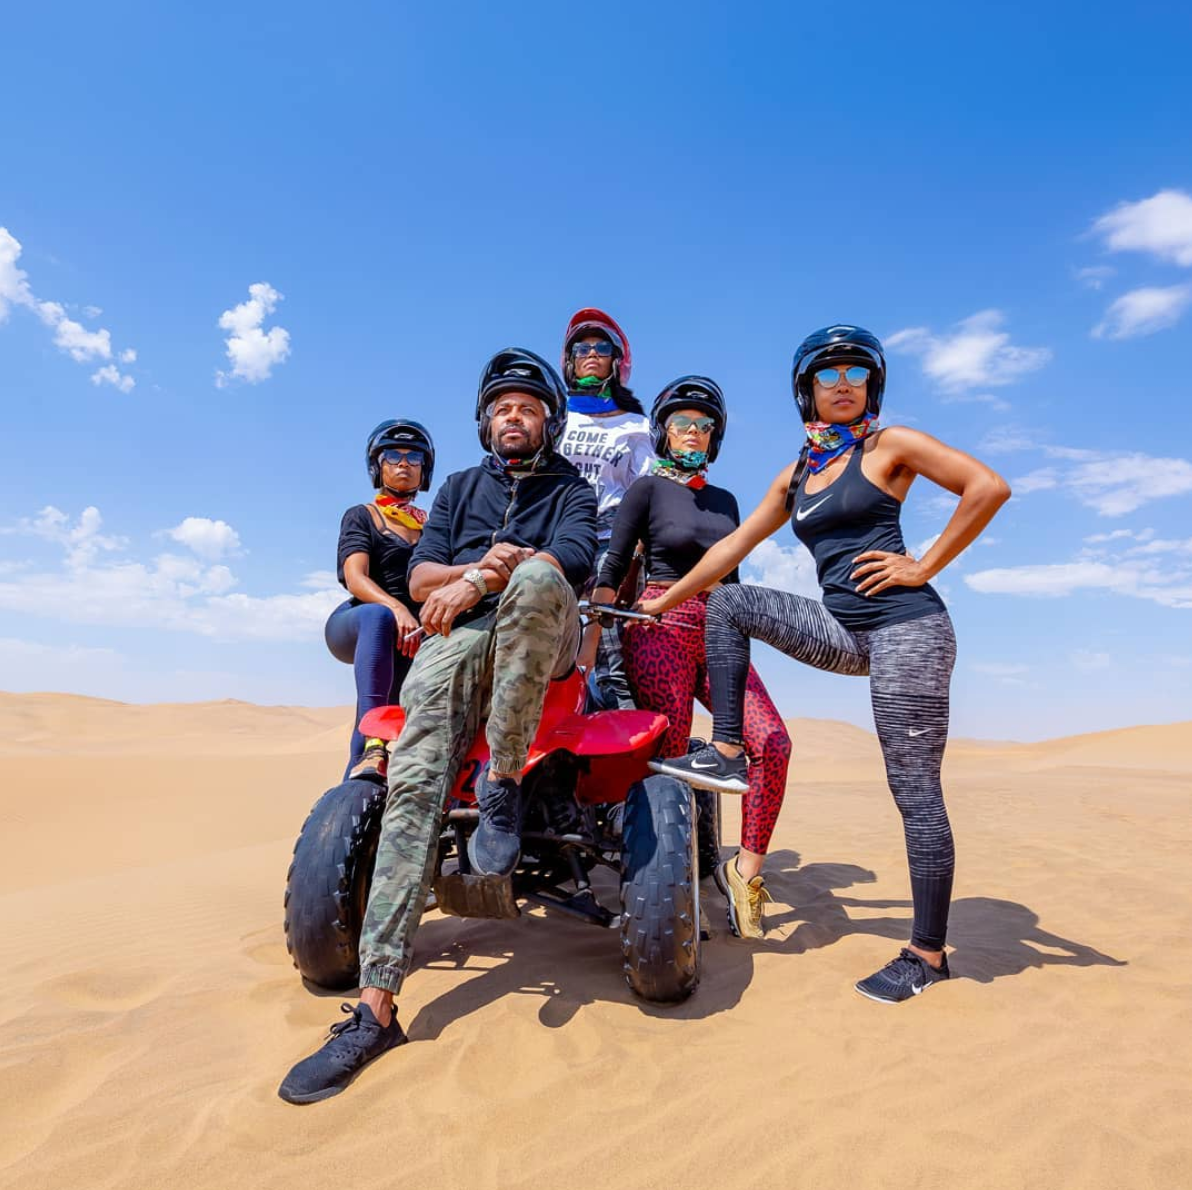 Beauty Boss Erika Liles Shows You The Wonders Of Namibia Her Way